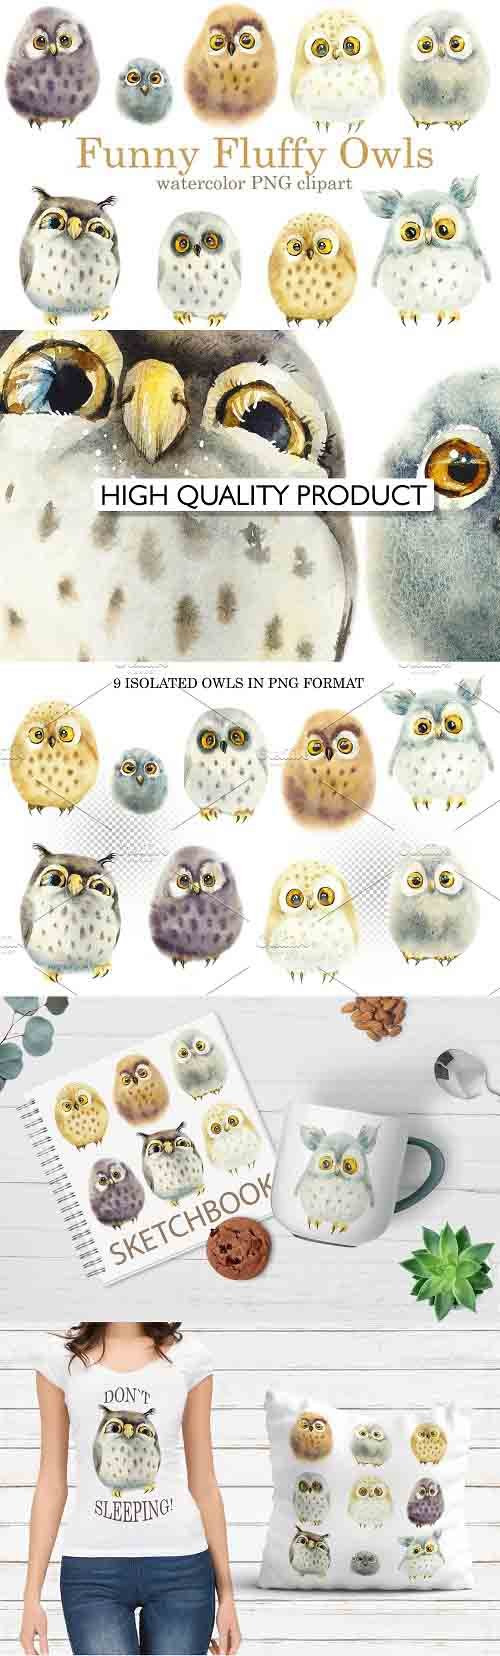 Watercolor Funny Owls 602275 - PNG clipart